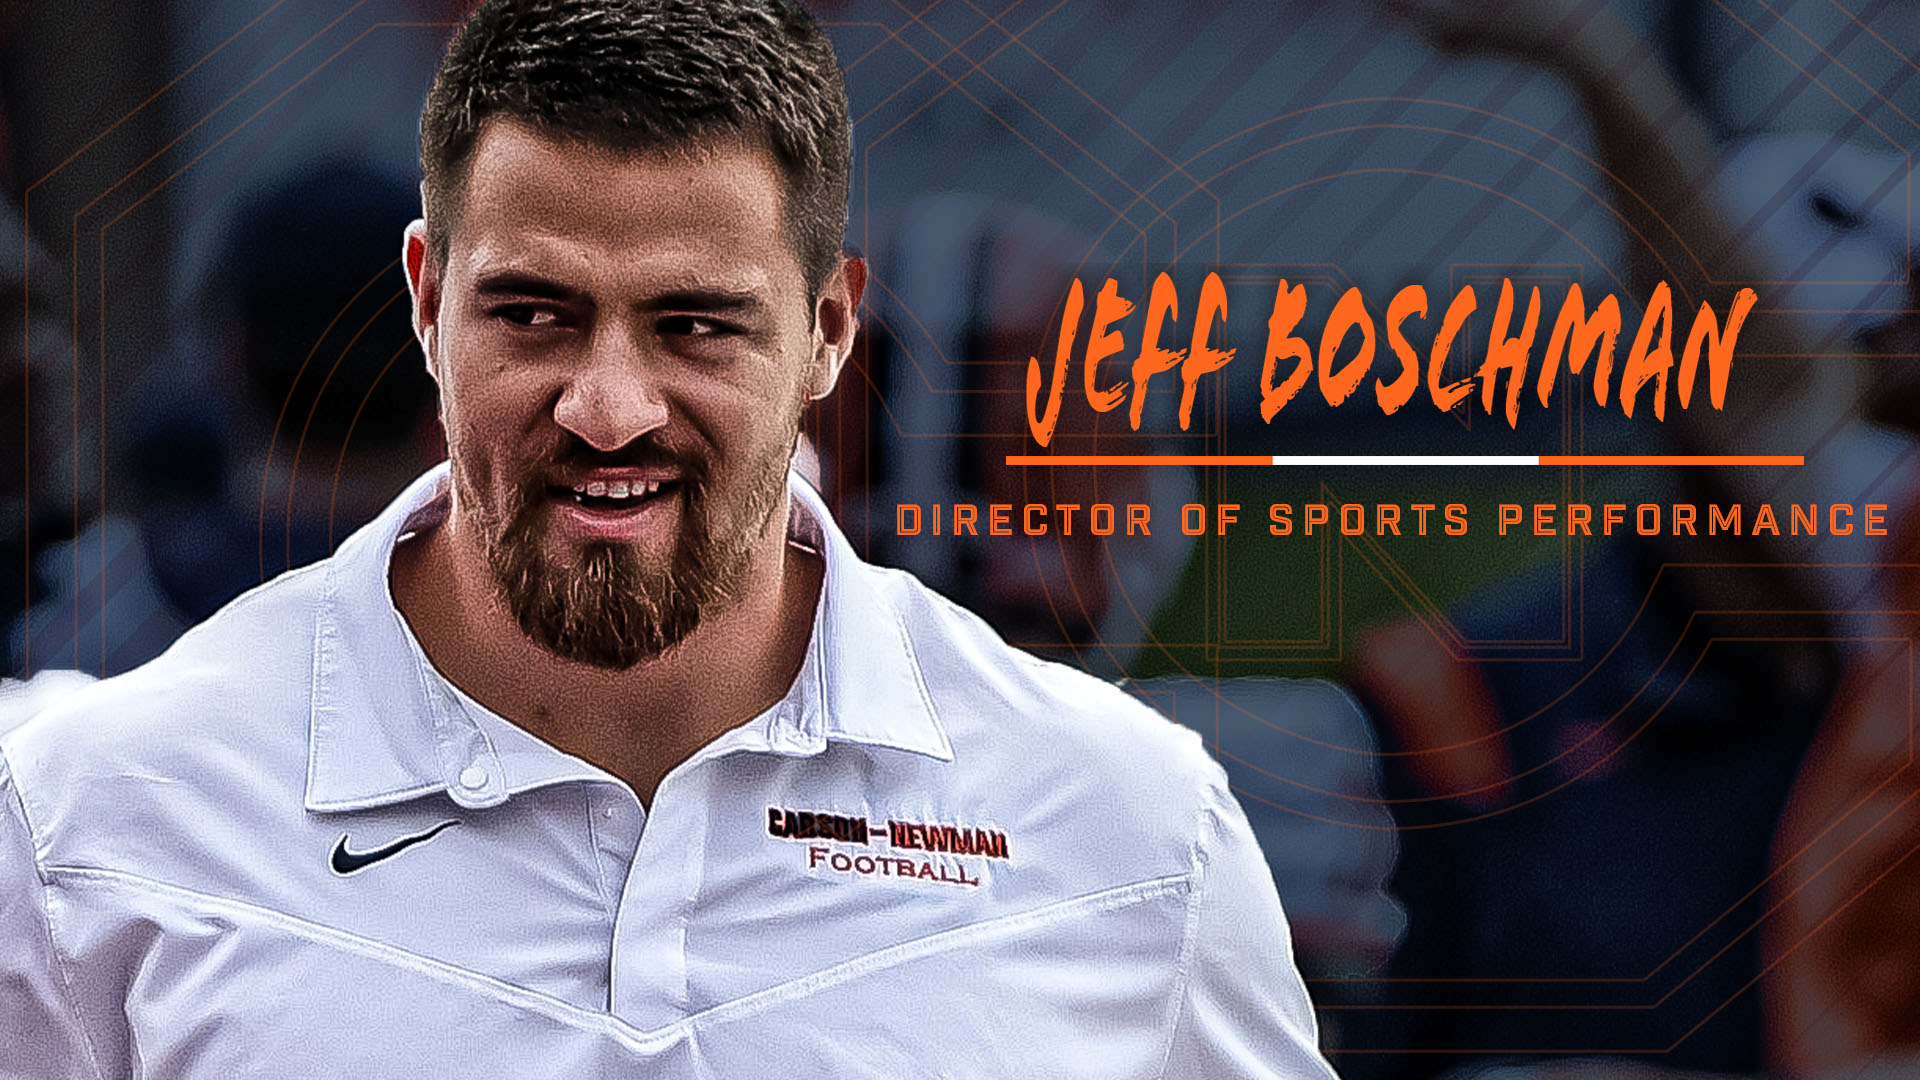 Boschman promoted to Director of Sports Performance after Long's retirement